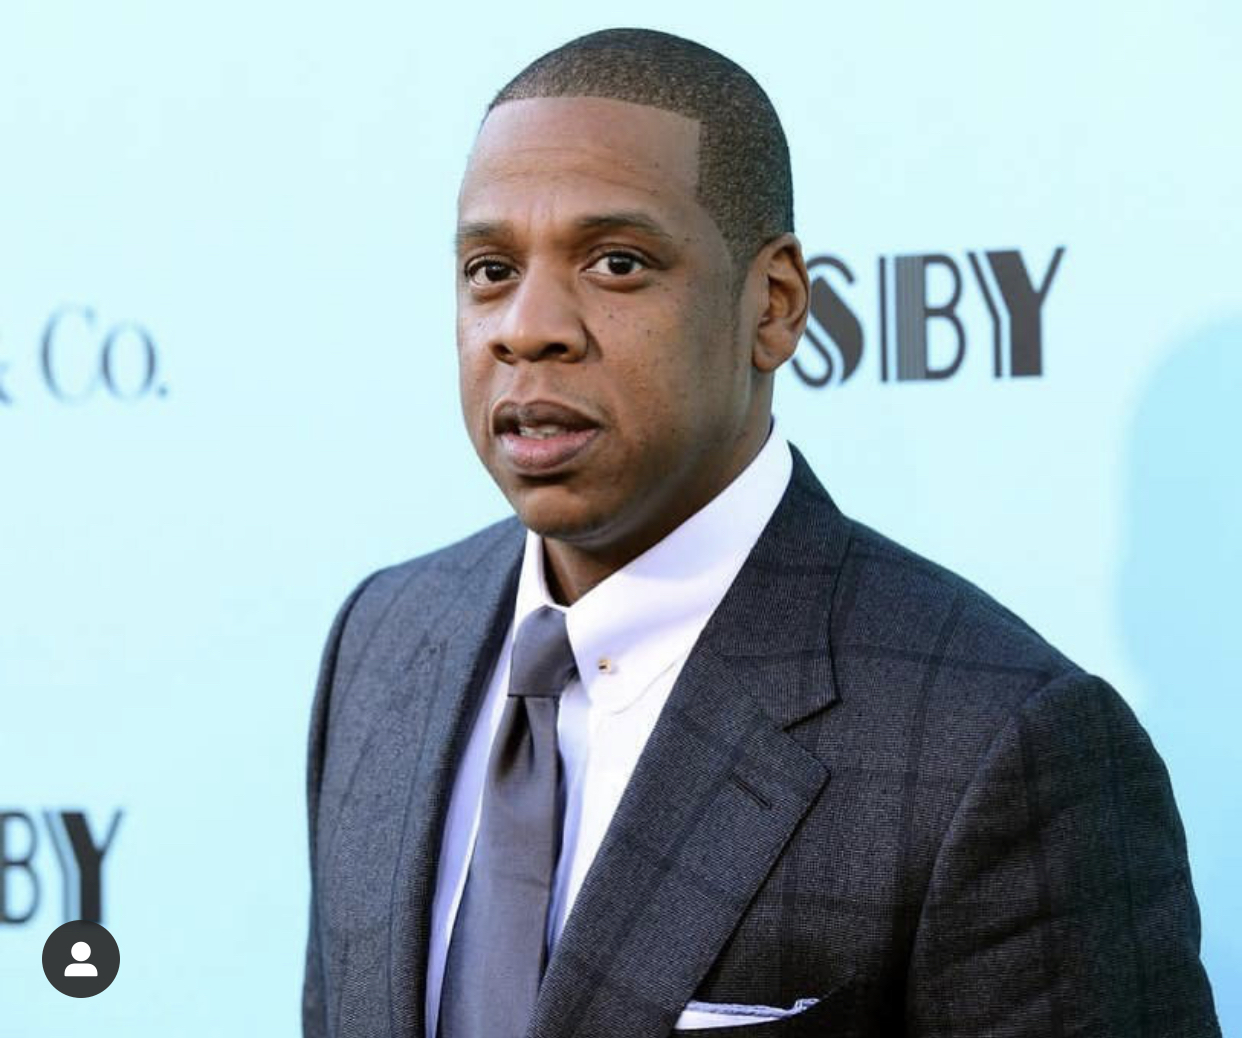 Jay Z To Launch Roc Nation School of Music - The Elites Nigeria